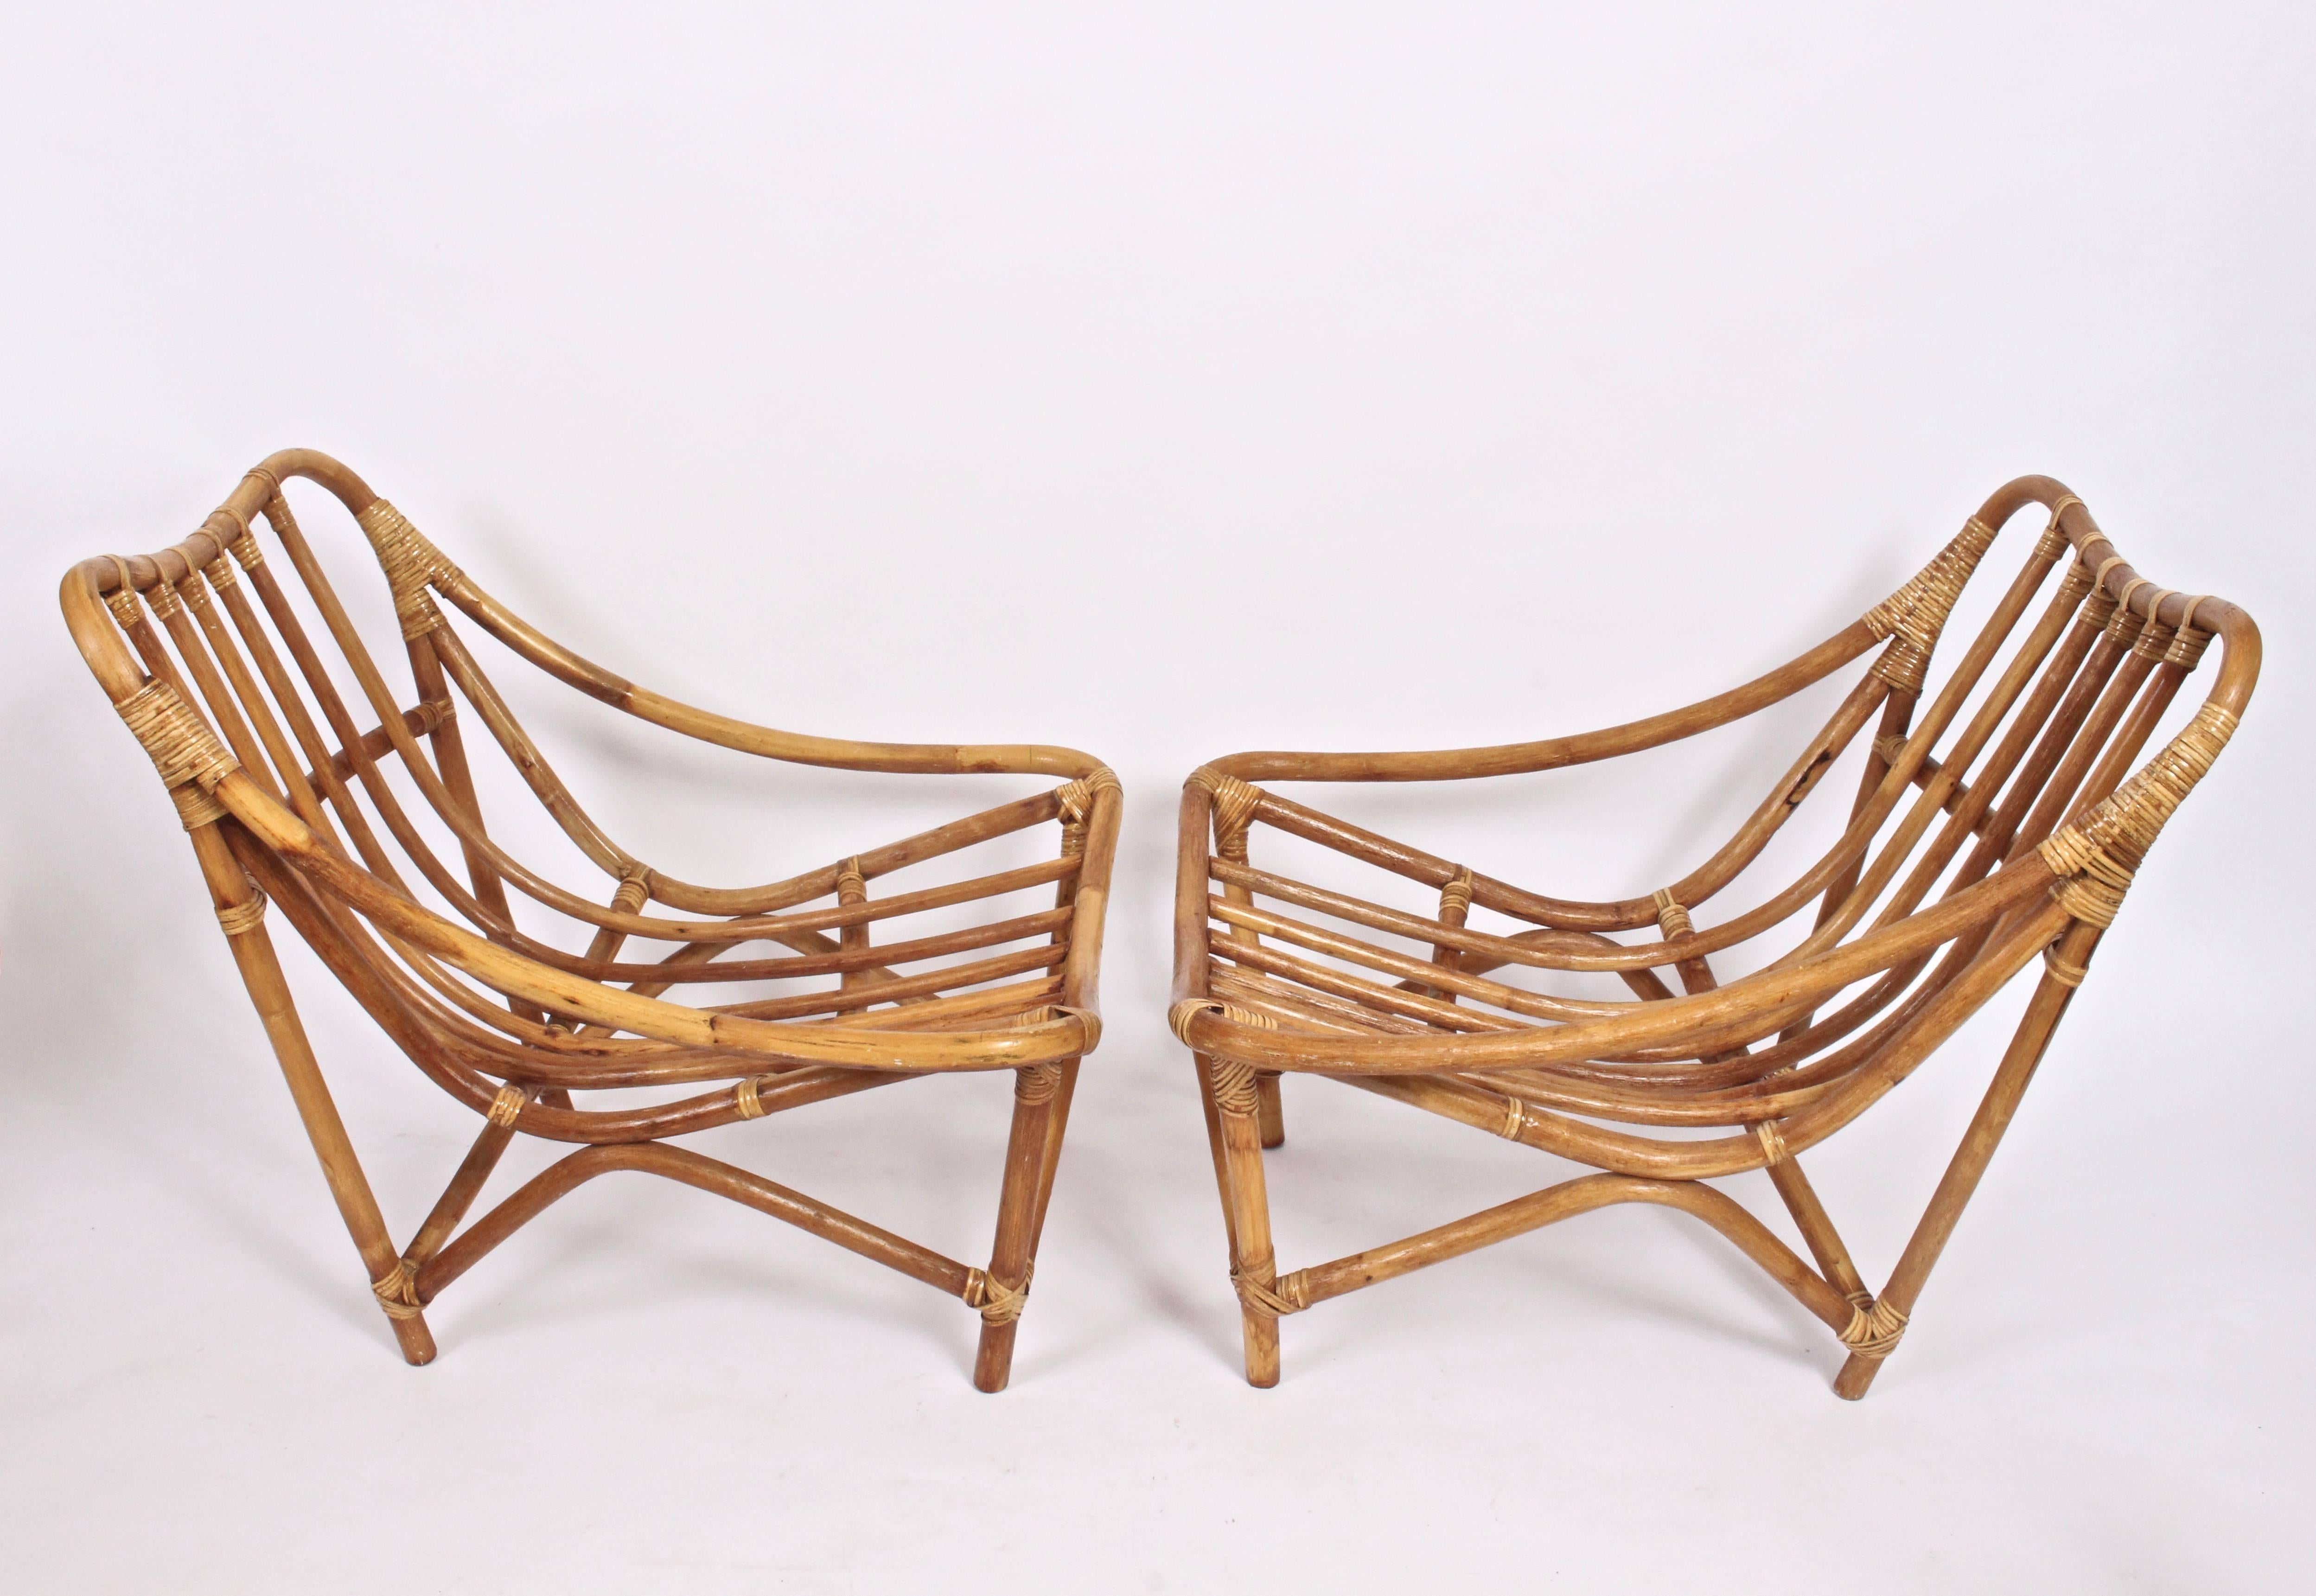 Substantial oversized Organic Modern European Rattan wrapped Bamboo Armchairs. Comfortable. Smooth curved lines.  Arm height 16 H. Shown without cushions. As seen in the film Beautiful Boy. Perfect for dry outdoor climates. Palm Springs. French